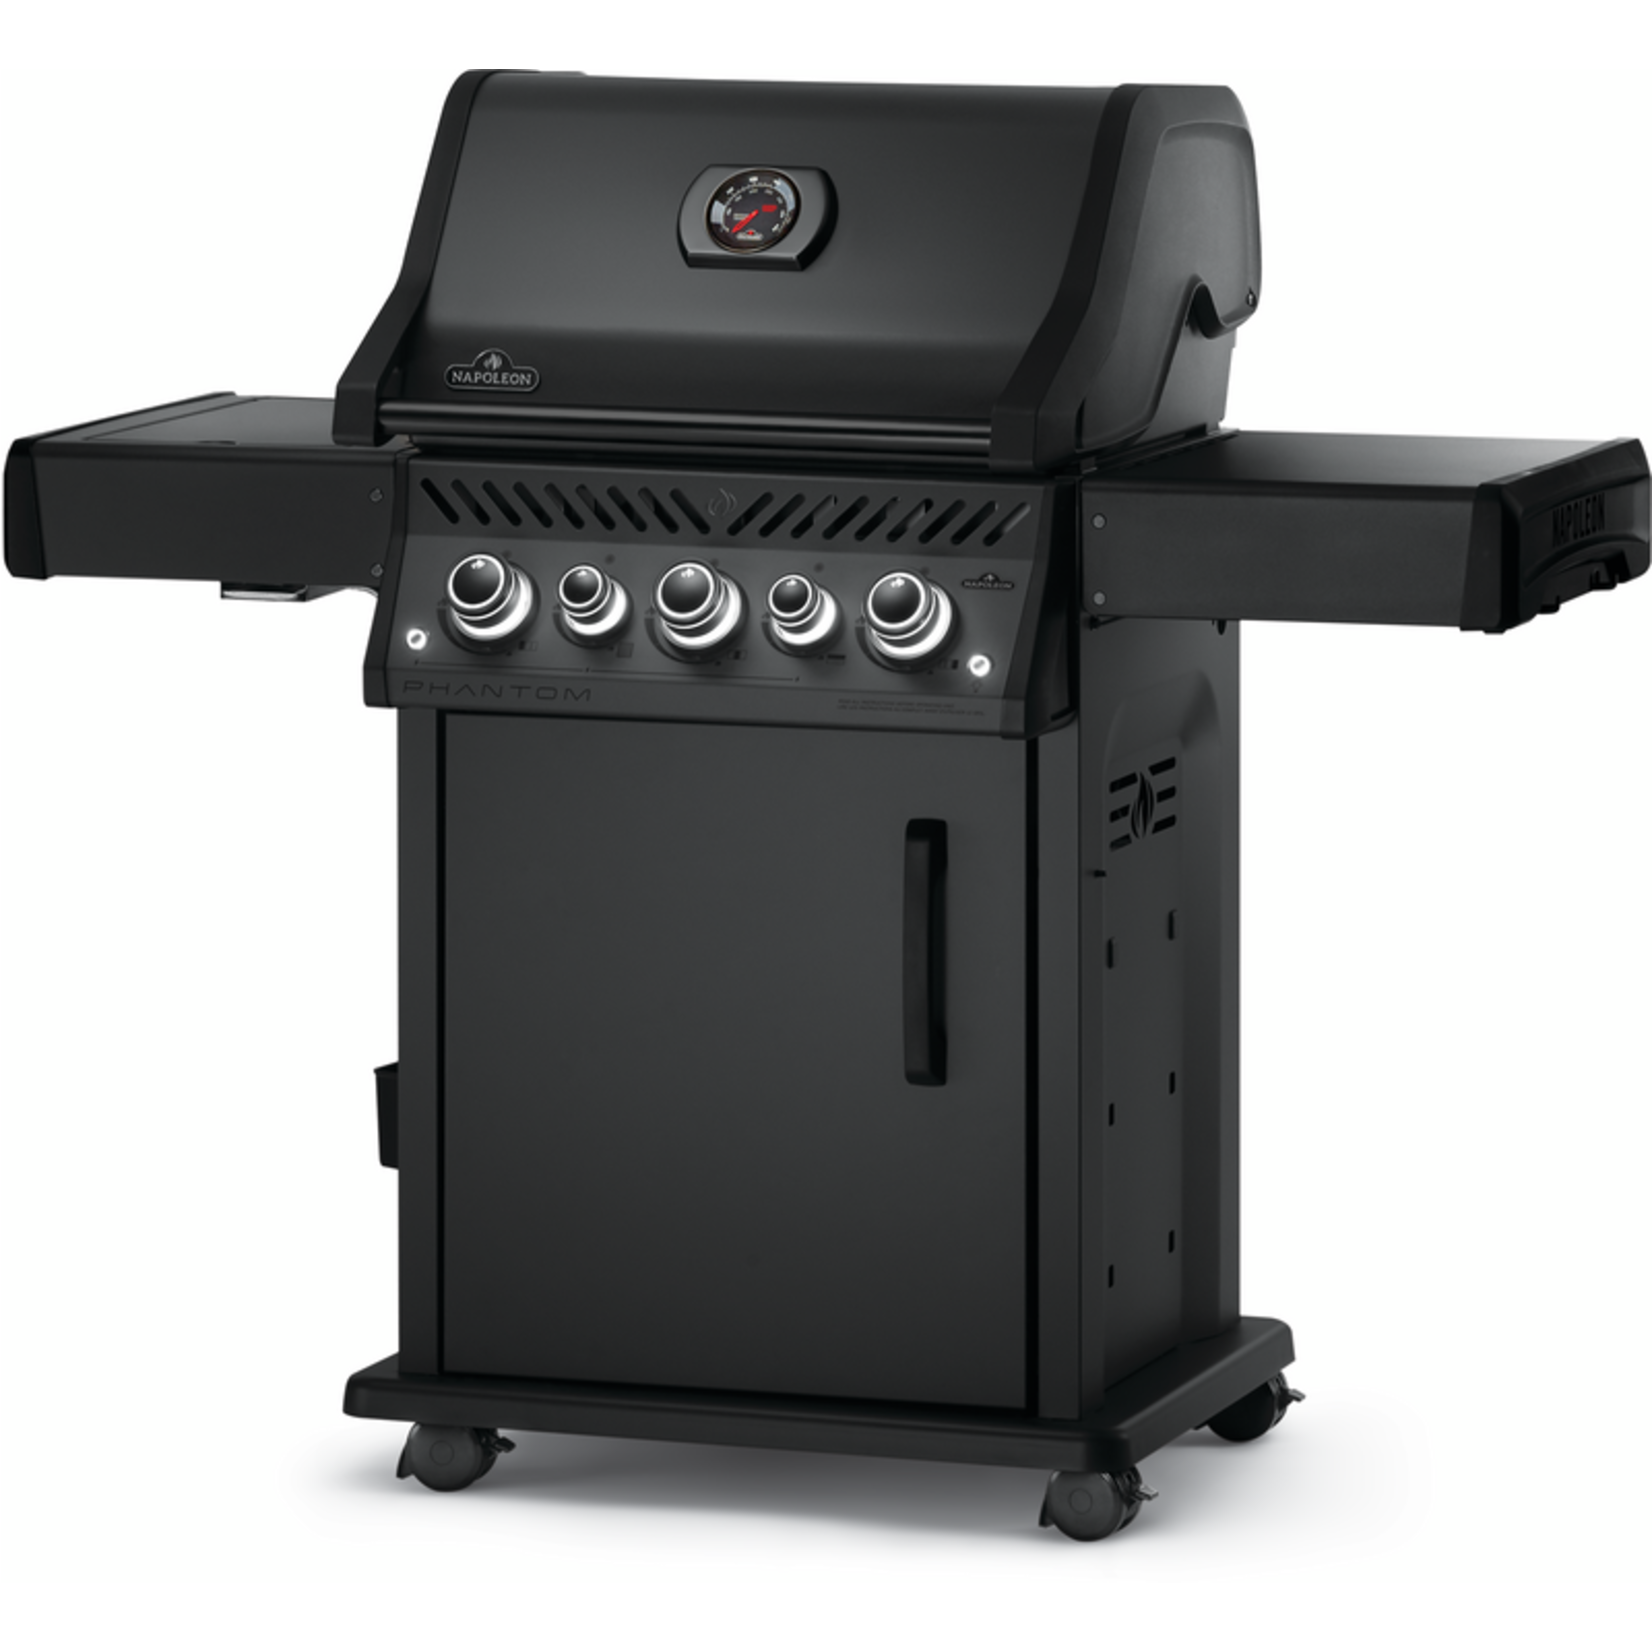 Napoleon PHANTOM Rogue® SE 425 Gas Grill with Infrared Side and Rear Burner NG